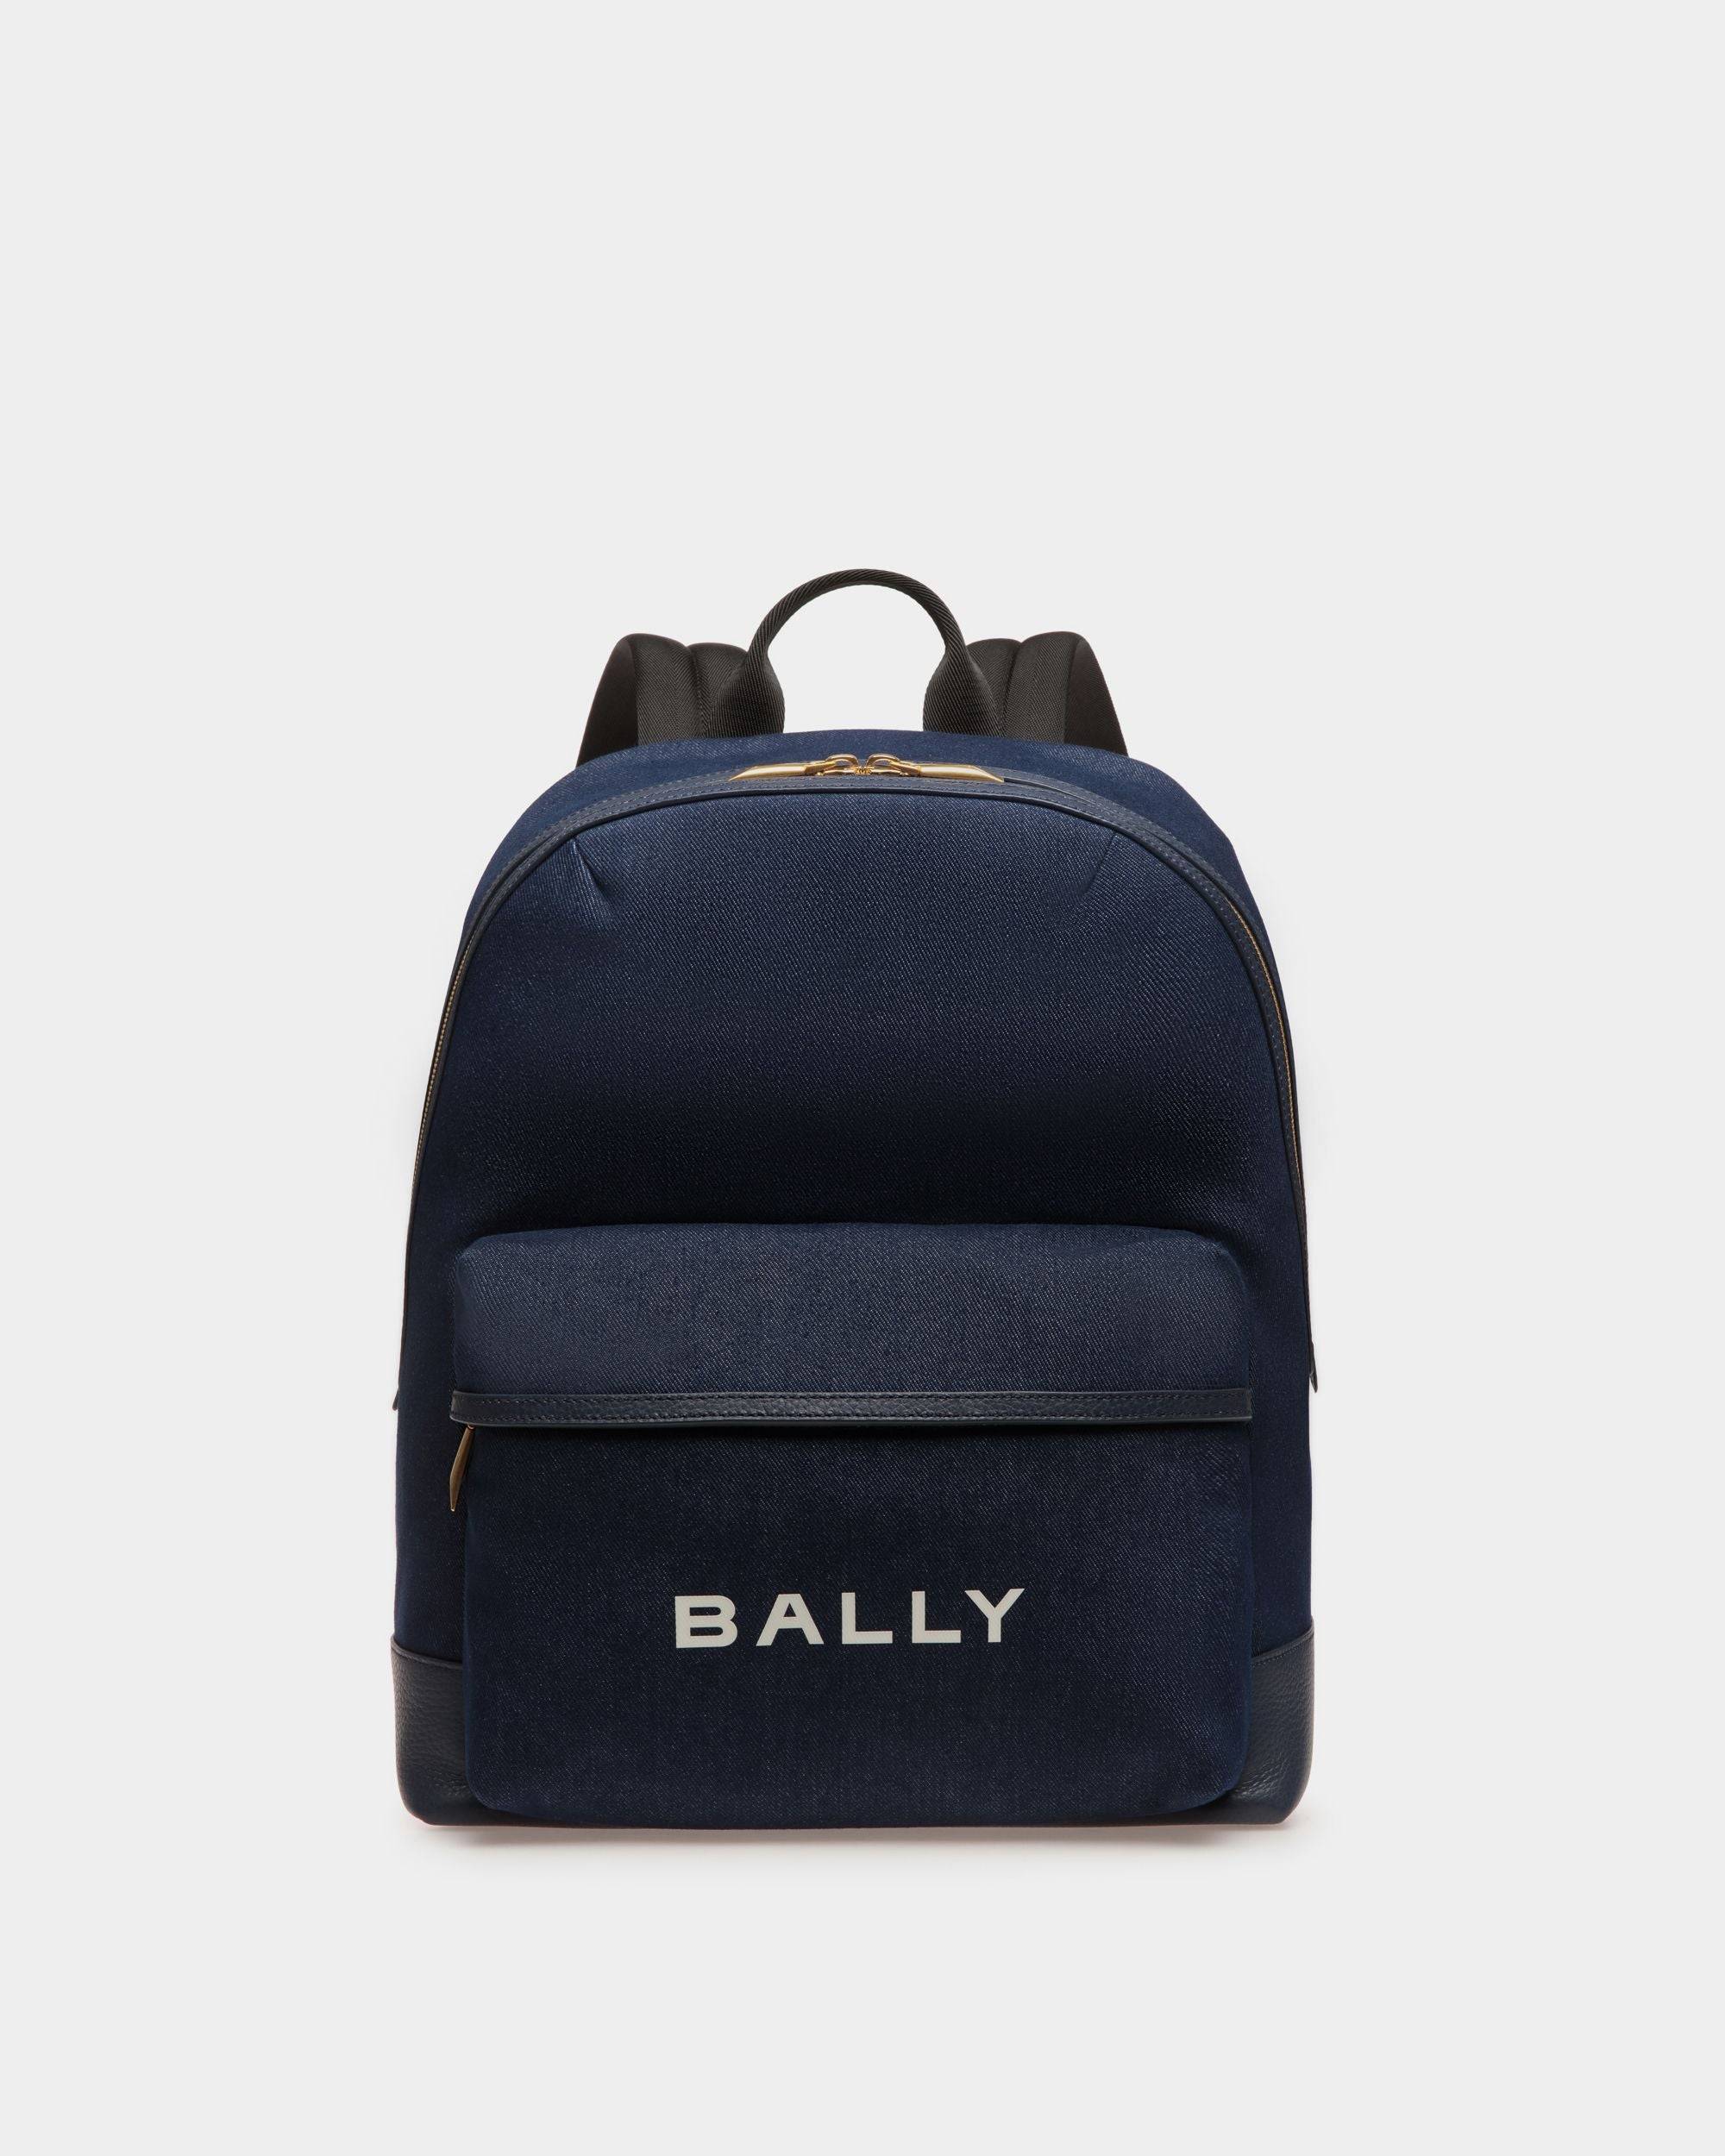 Bar | Men's Backpack in Blue Canvas And Leather | Bally | Still Life Front